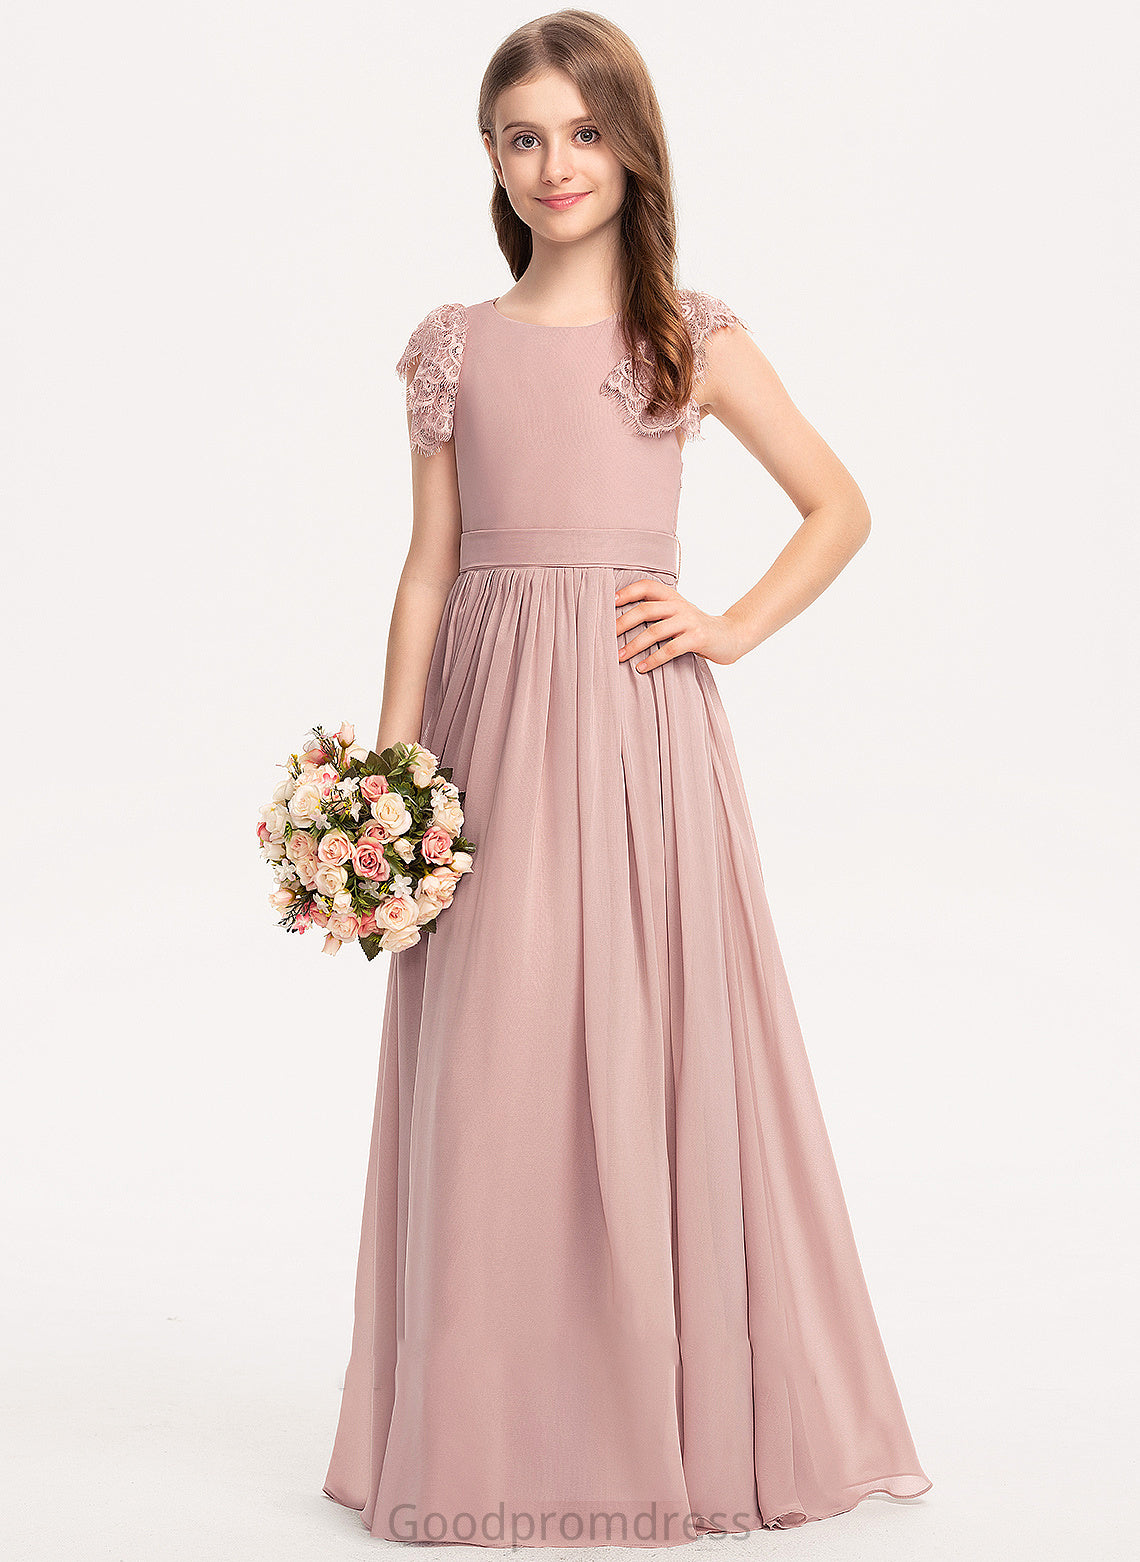 Chiffon Junior Bridesmaid Dresses Floor-Length Teagan Bow(s) Neck Scoop A-Line Lace With